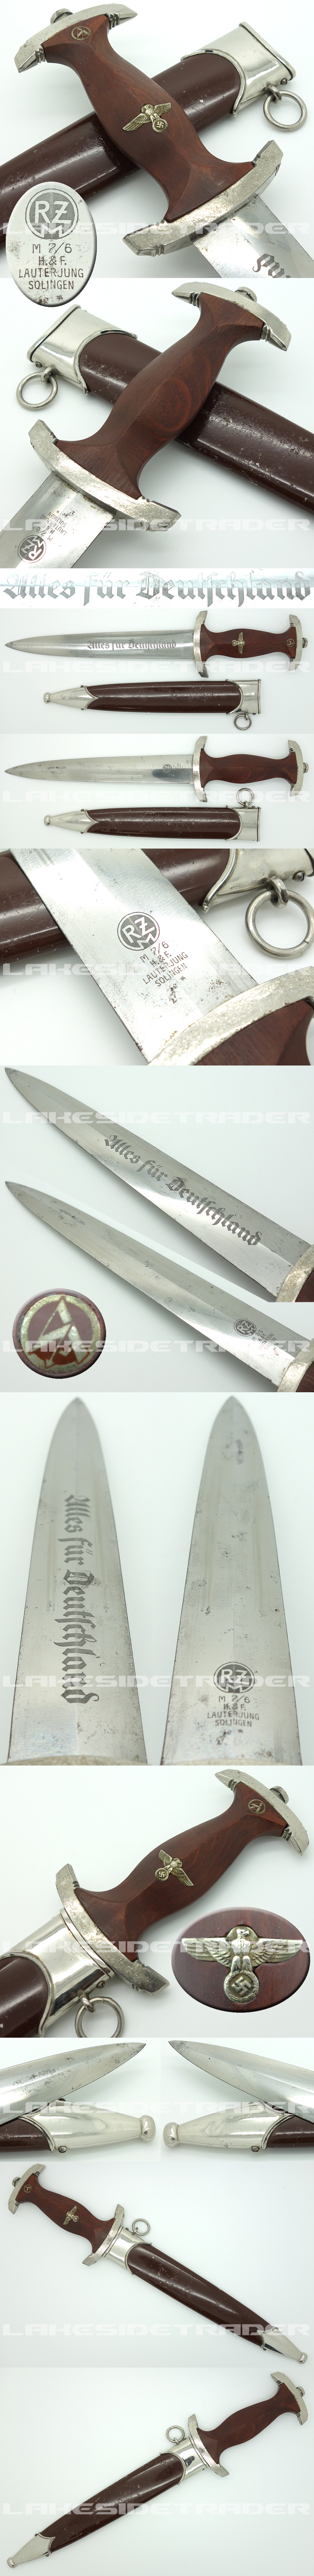 Transitional SA Dagger by H. & F. Lauterjung